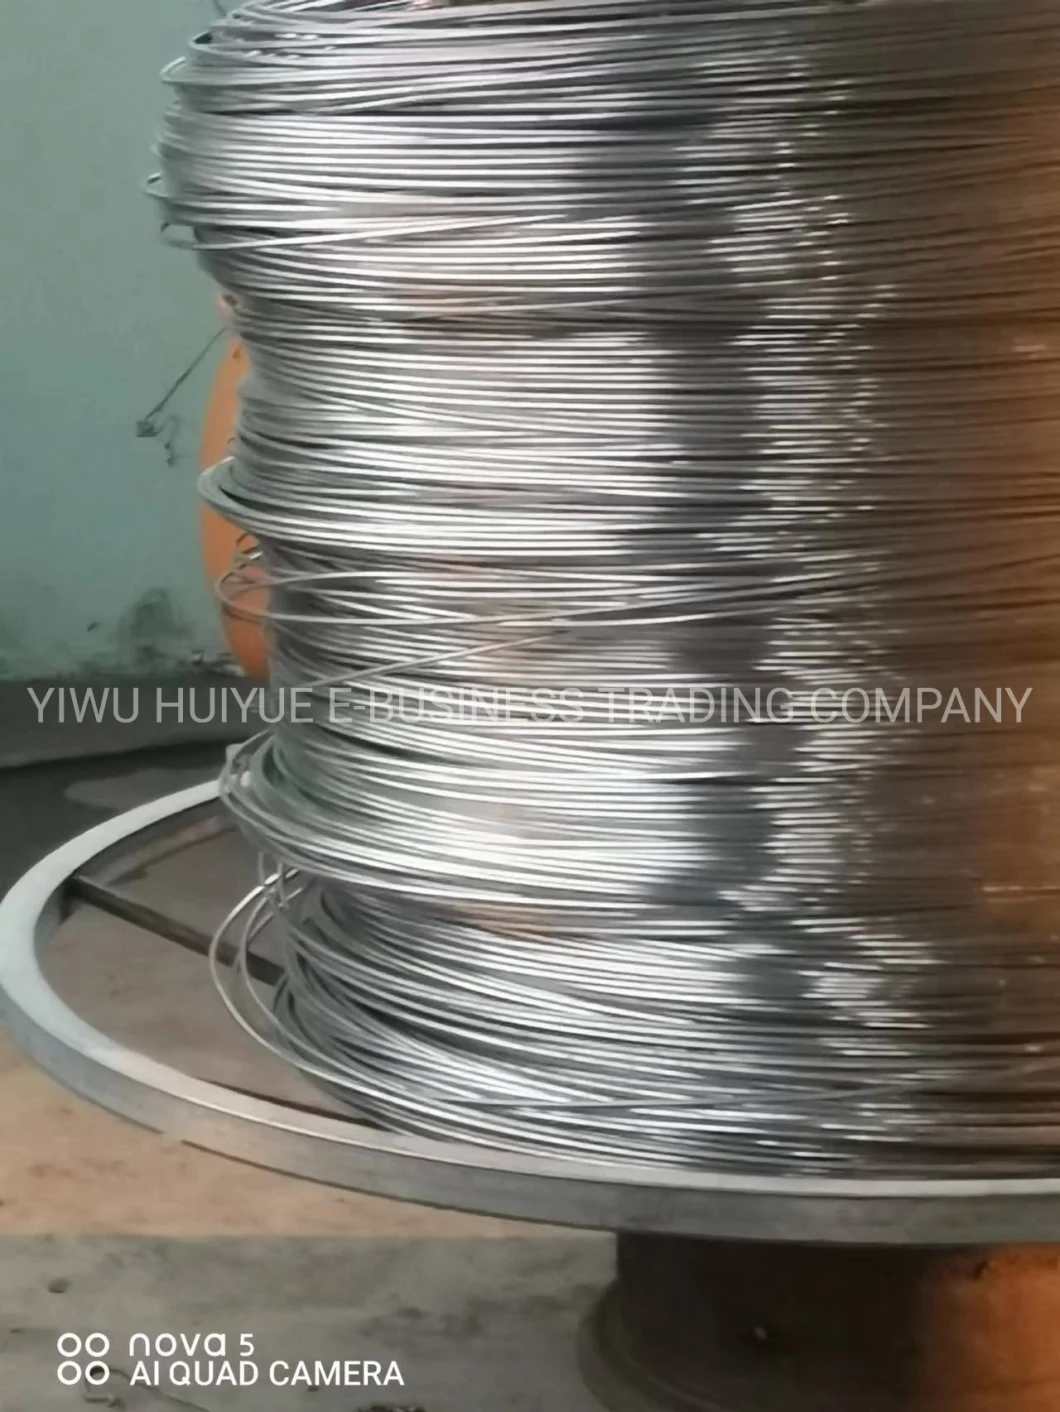 Stainless Steel 316L Coiled Tubing Factory in China, 3/8inch, 1/4inch, 1/2inch, 5/8inch